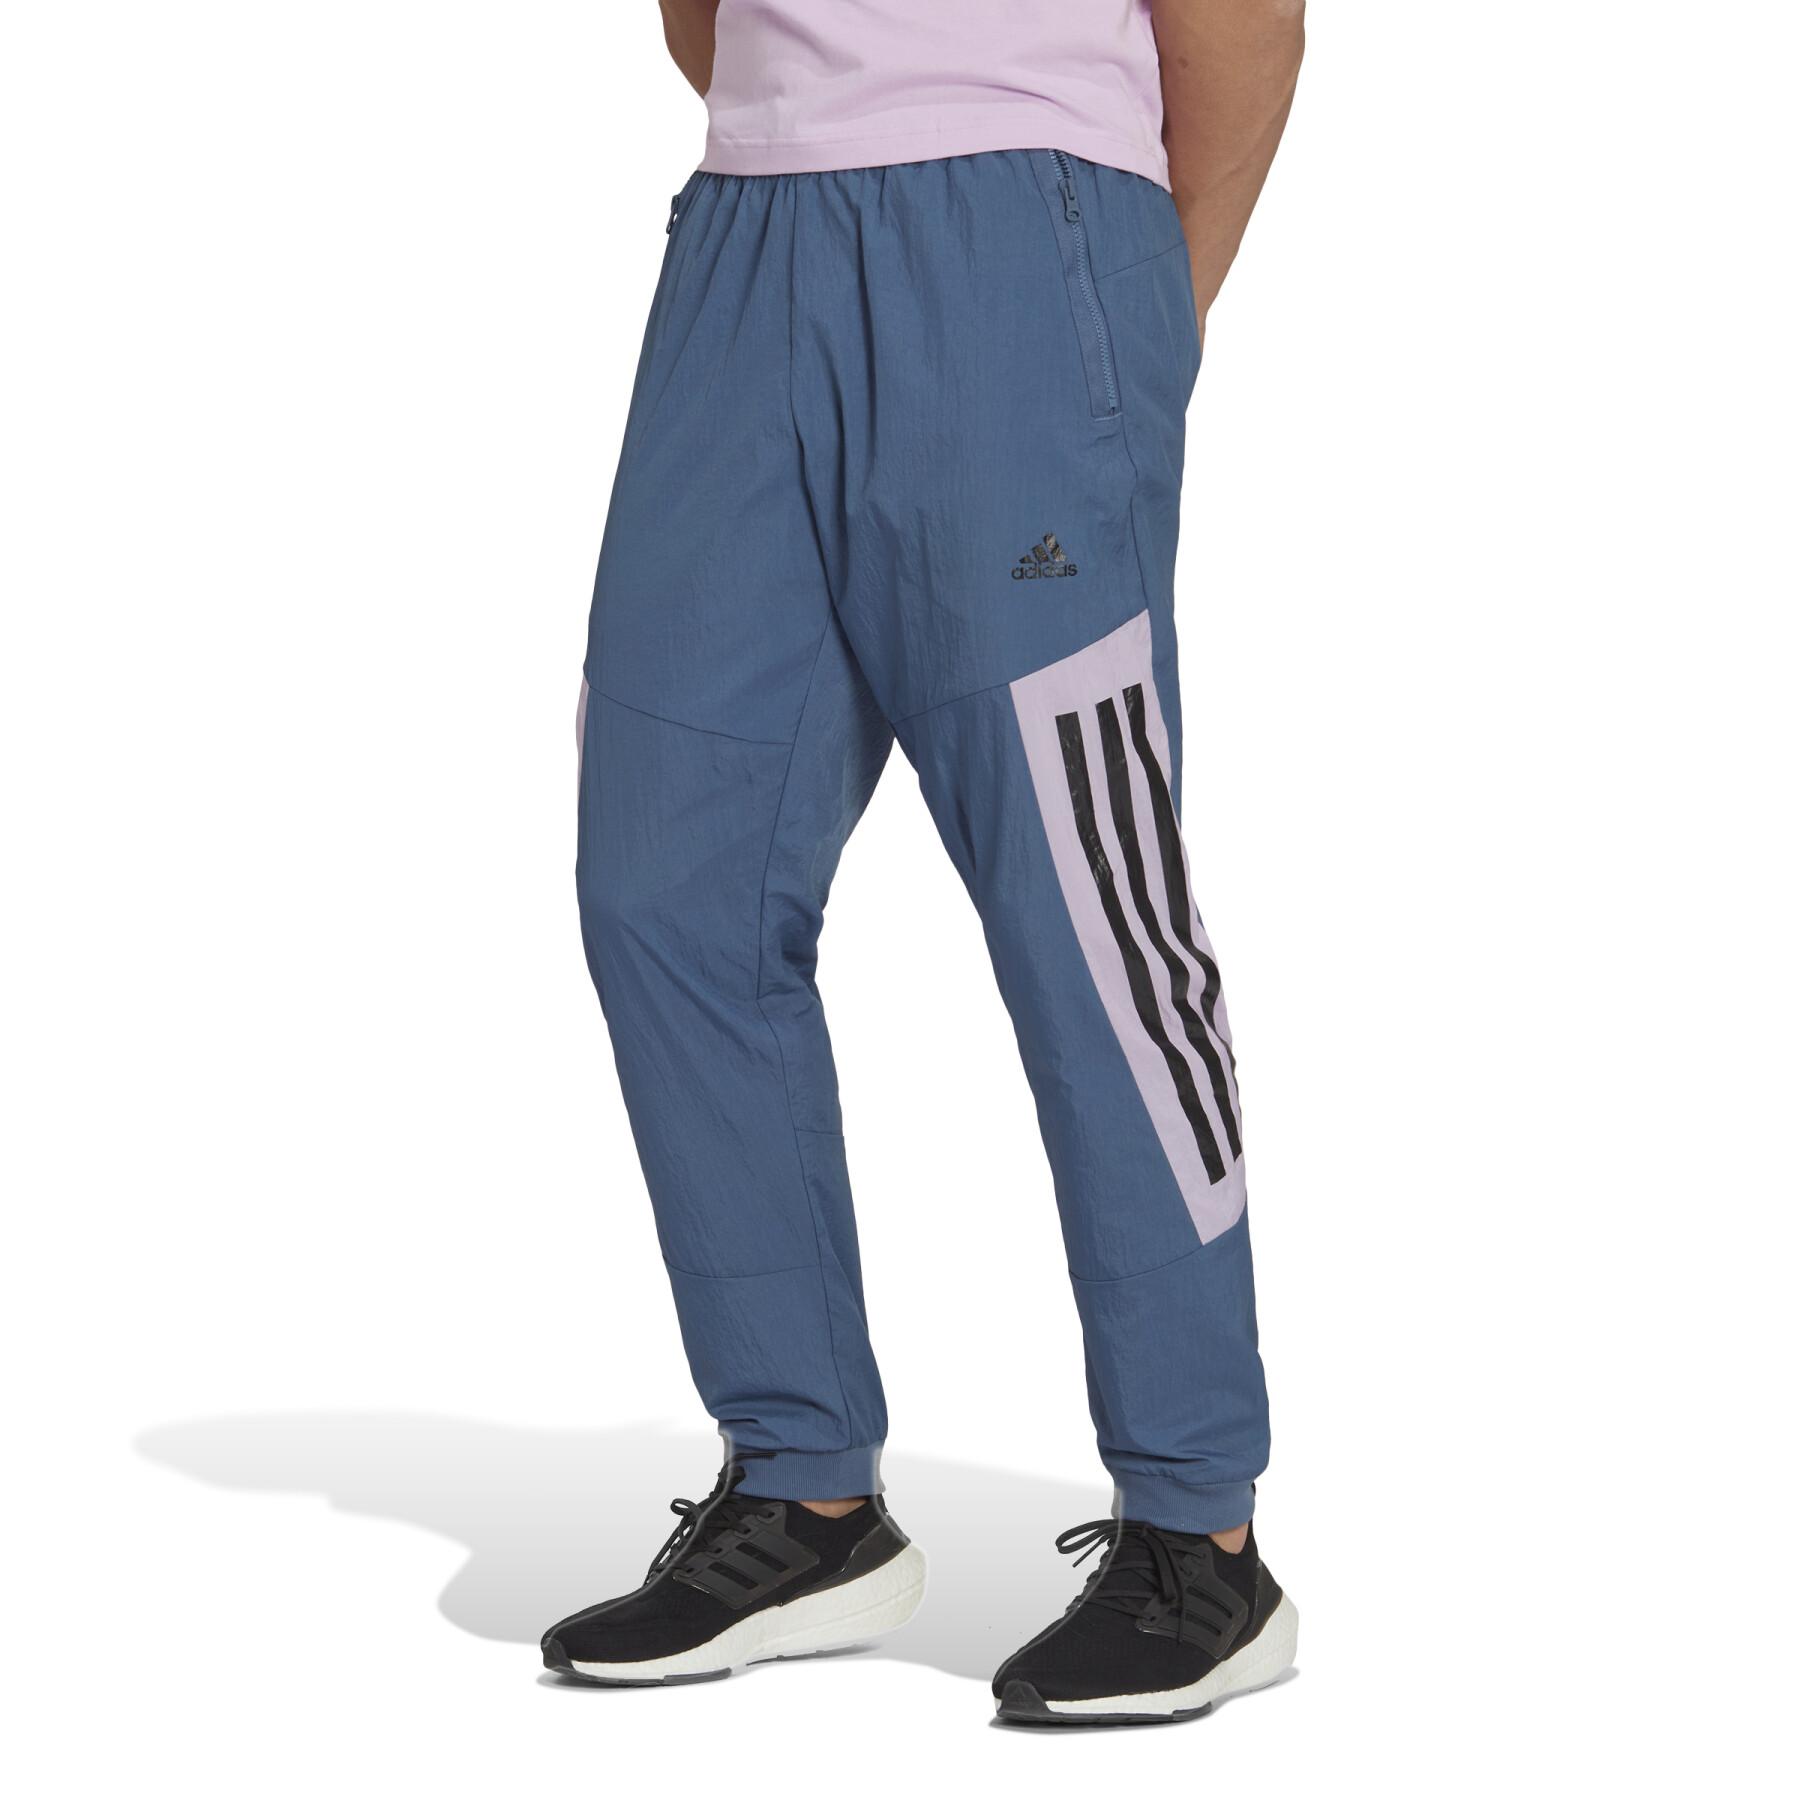 Woven jogging suit adidas Future Icons